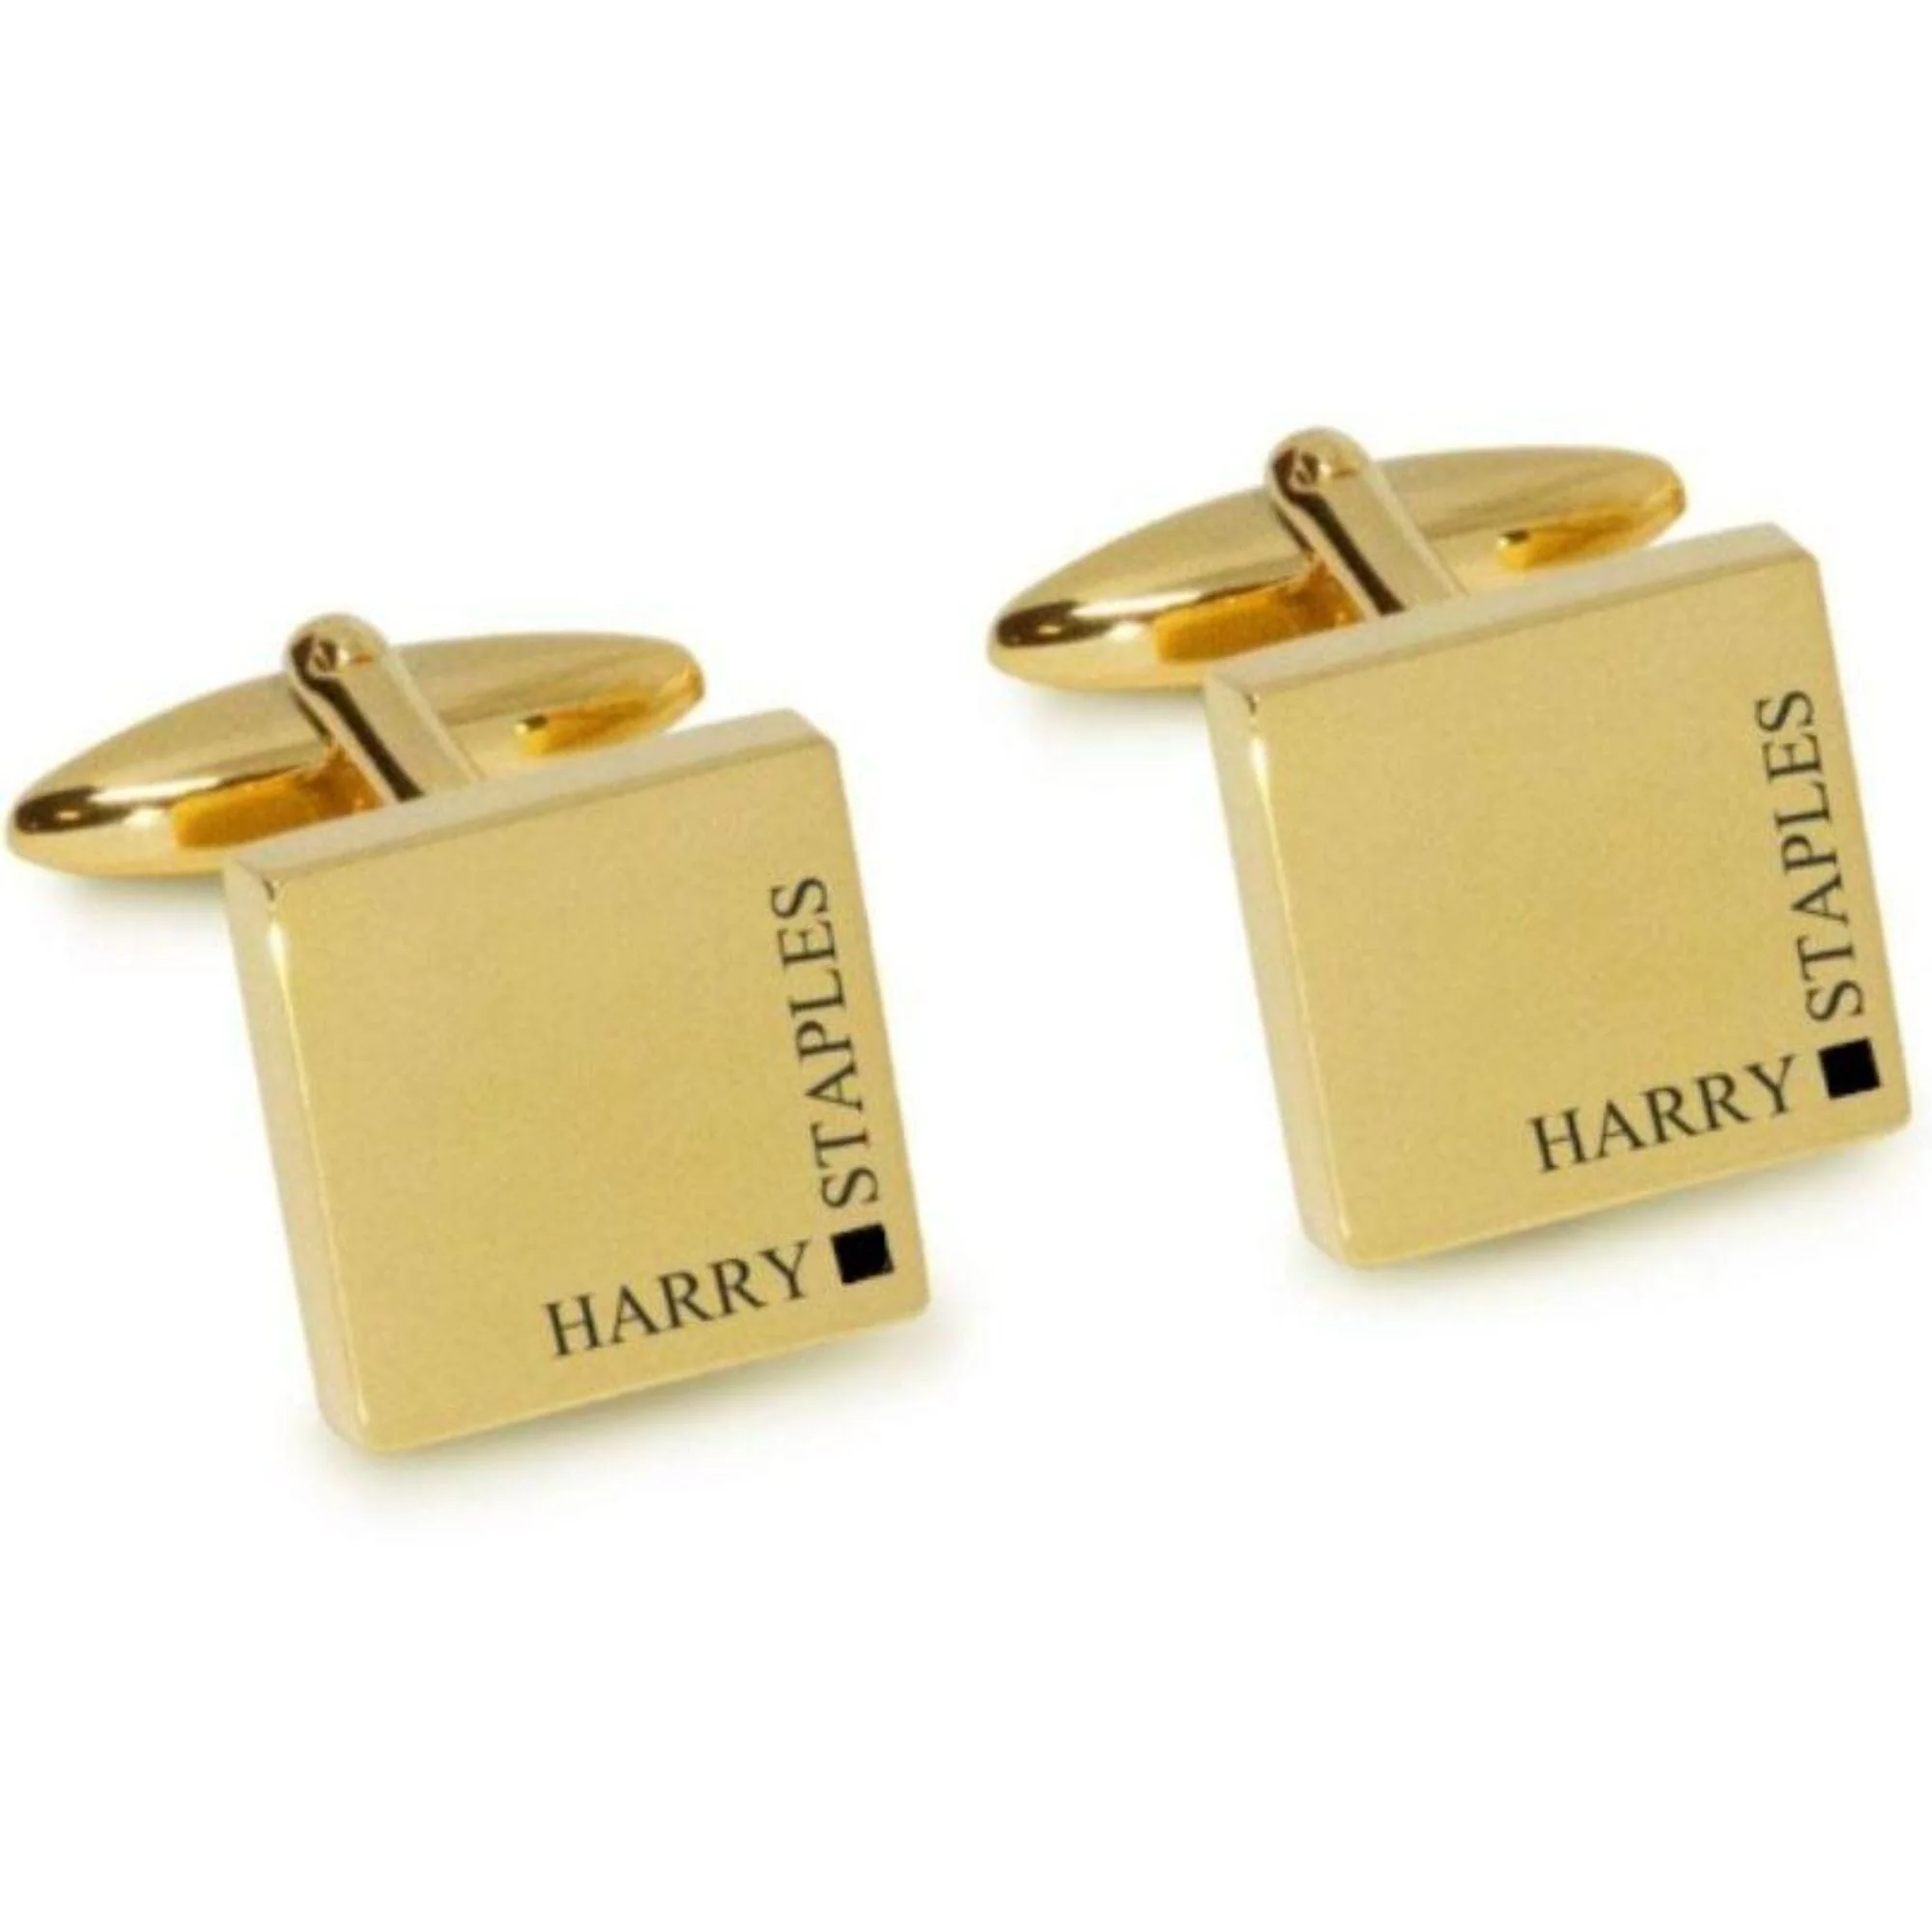 Full Name Engraved Cufflinks in Gold